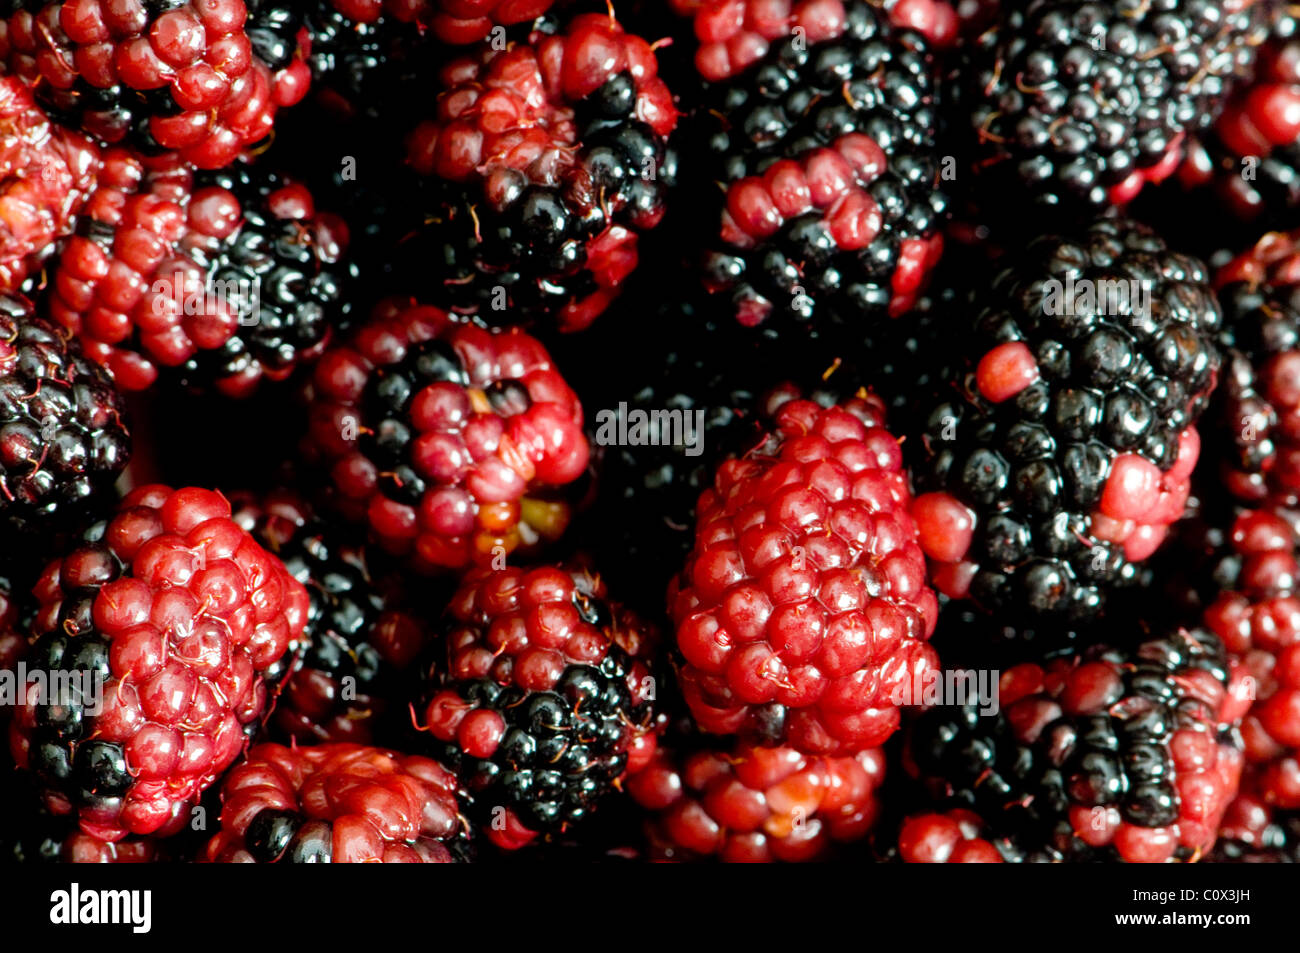 Lots of berries arranged at the background Stock Photo